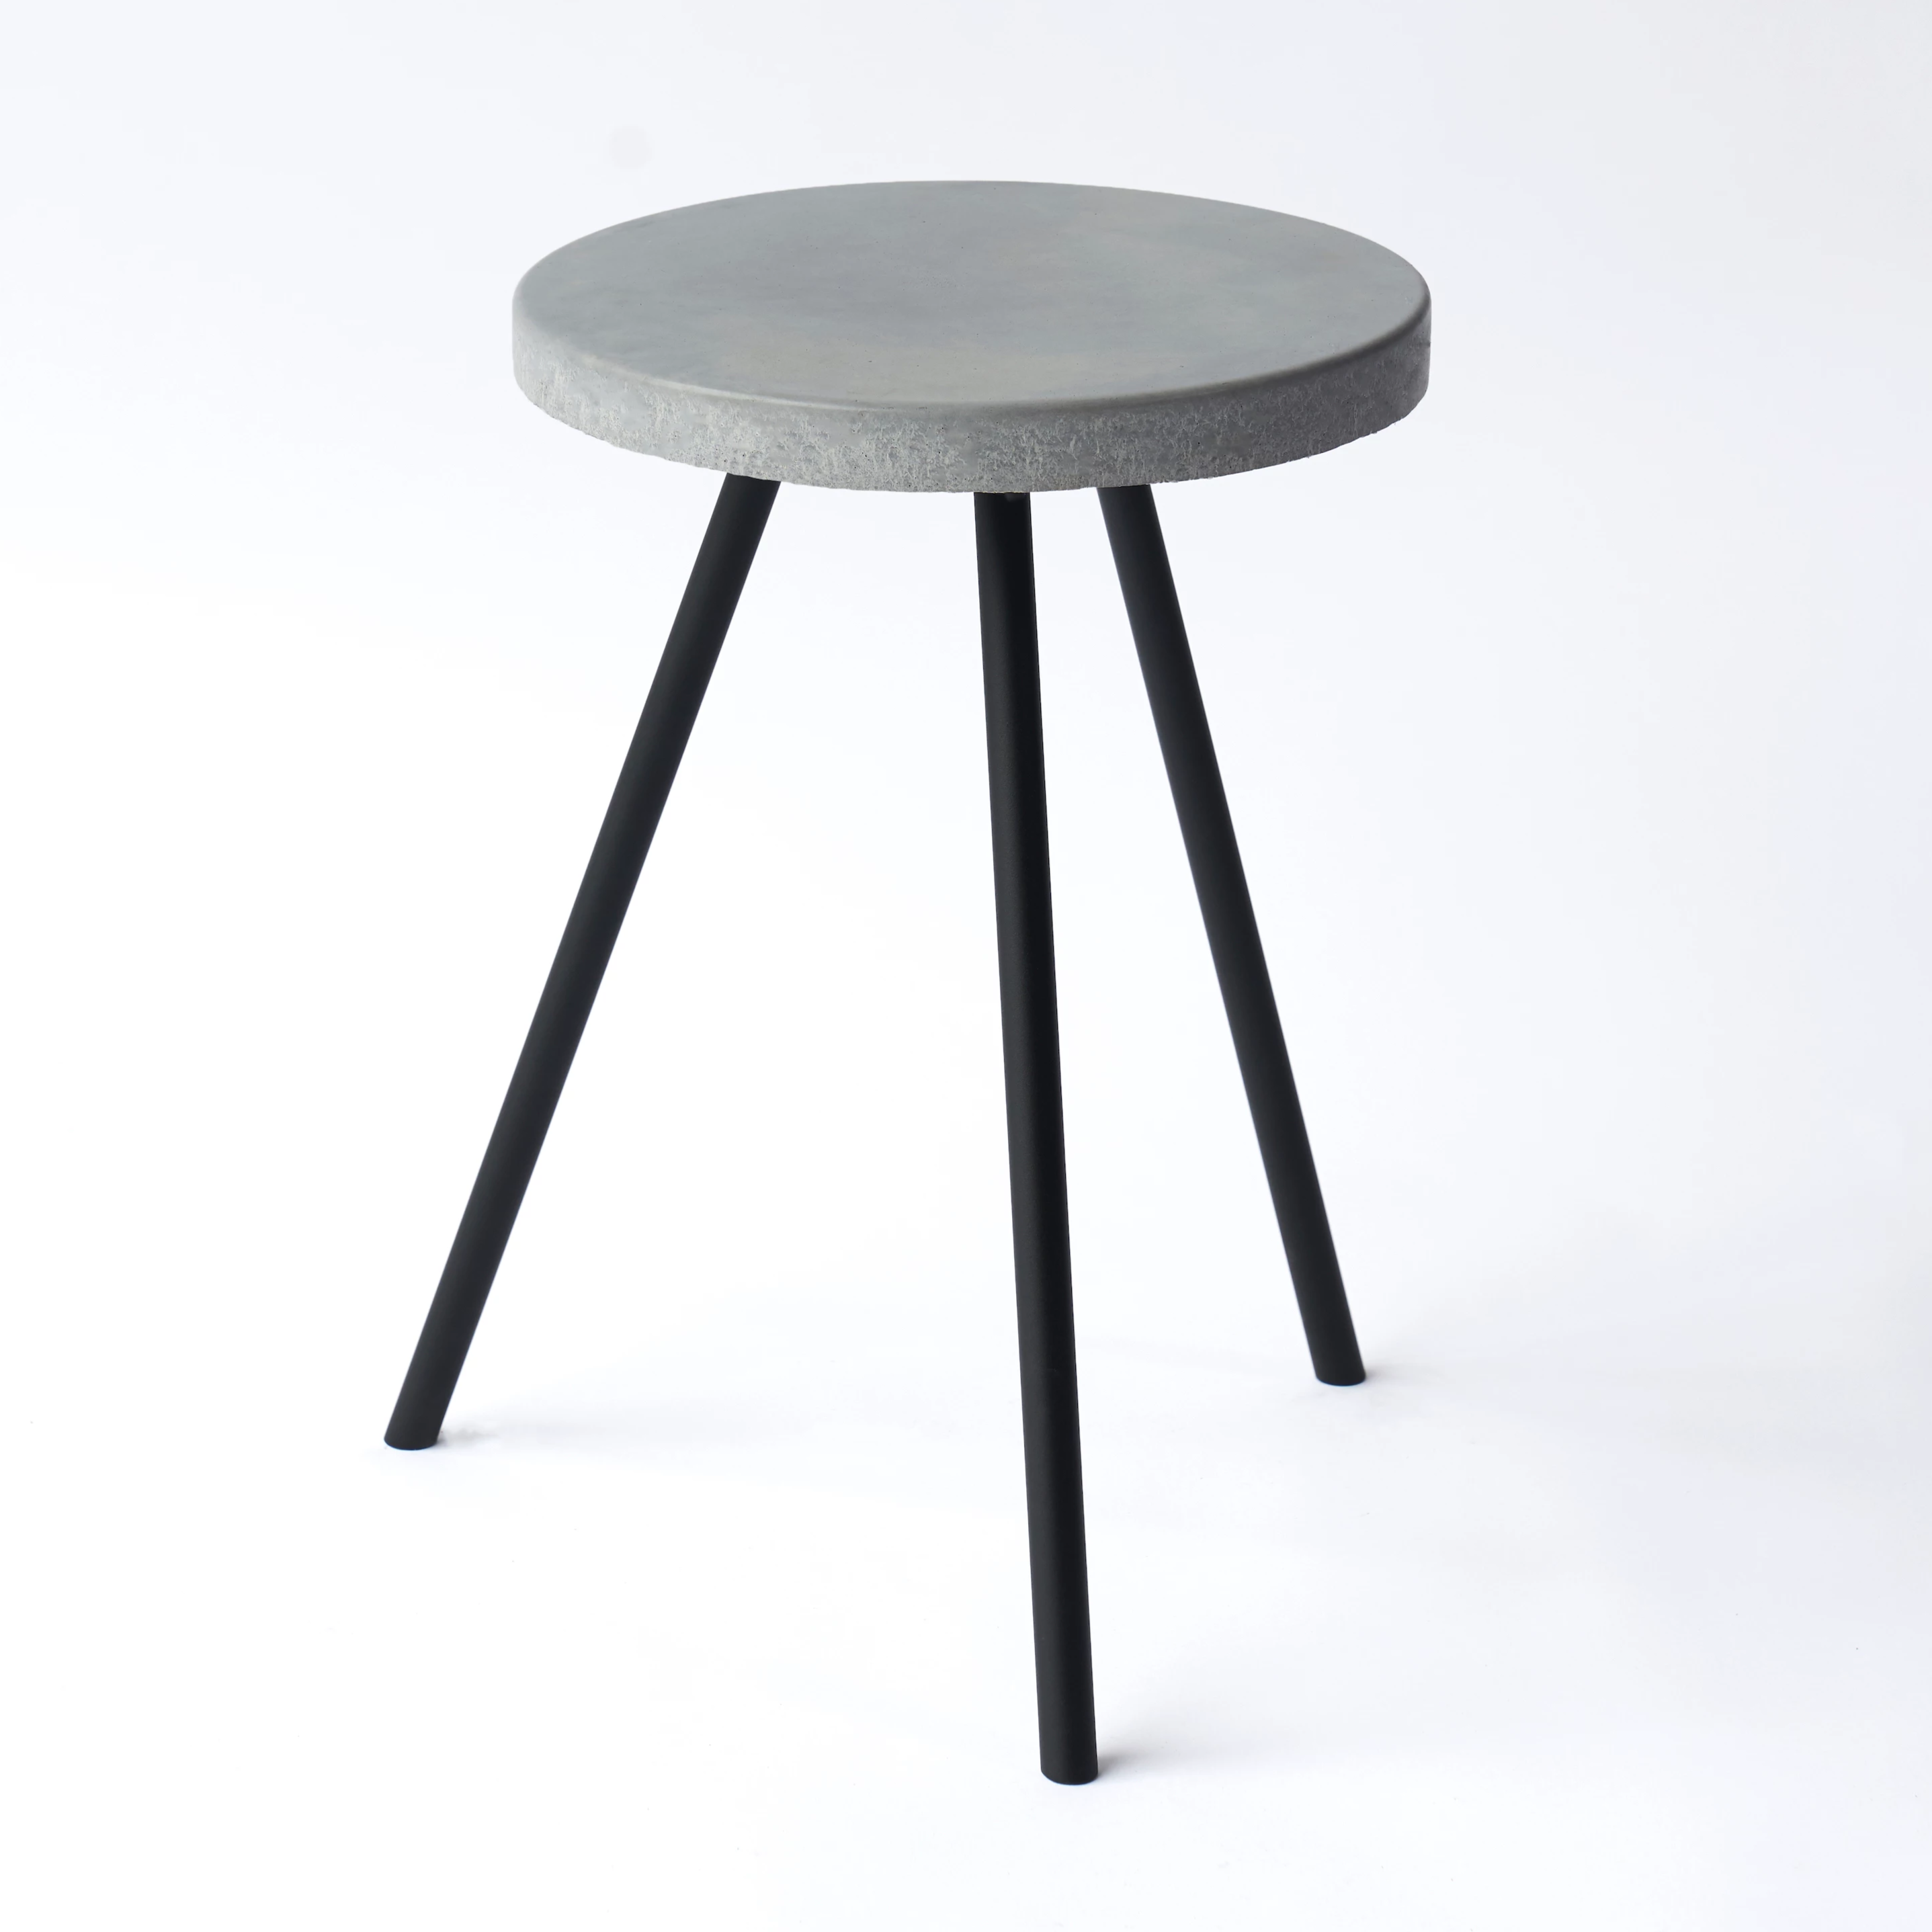 The Ross Side Table / Stool